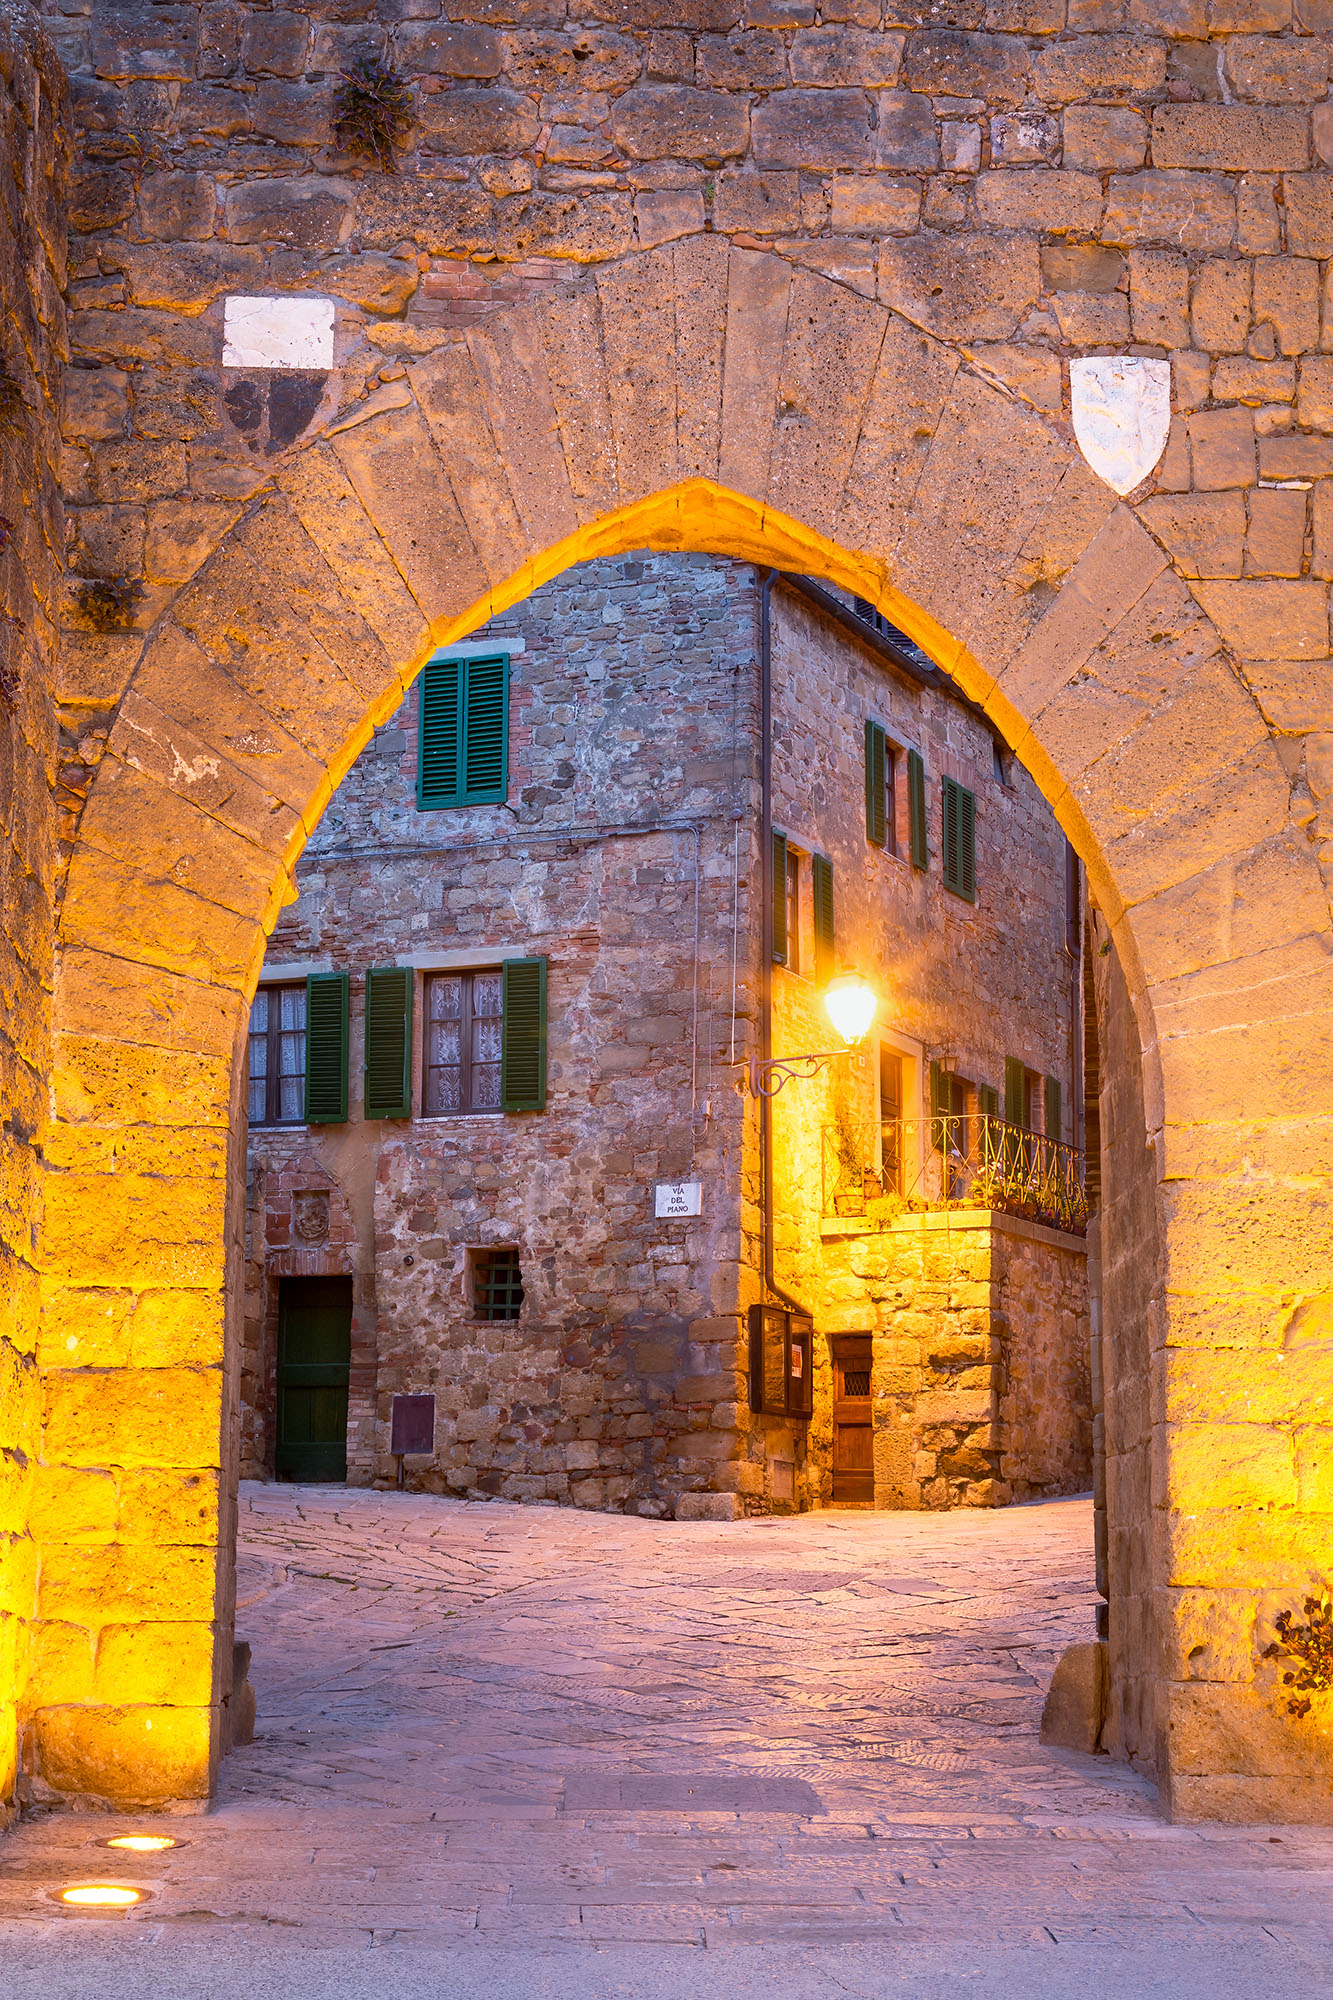 At the entrance to Monticchiello, Tuscany, Italy, I captured a scene that felt like stepping into a storybook. An arched stone...